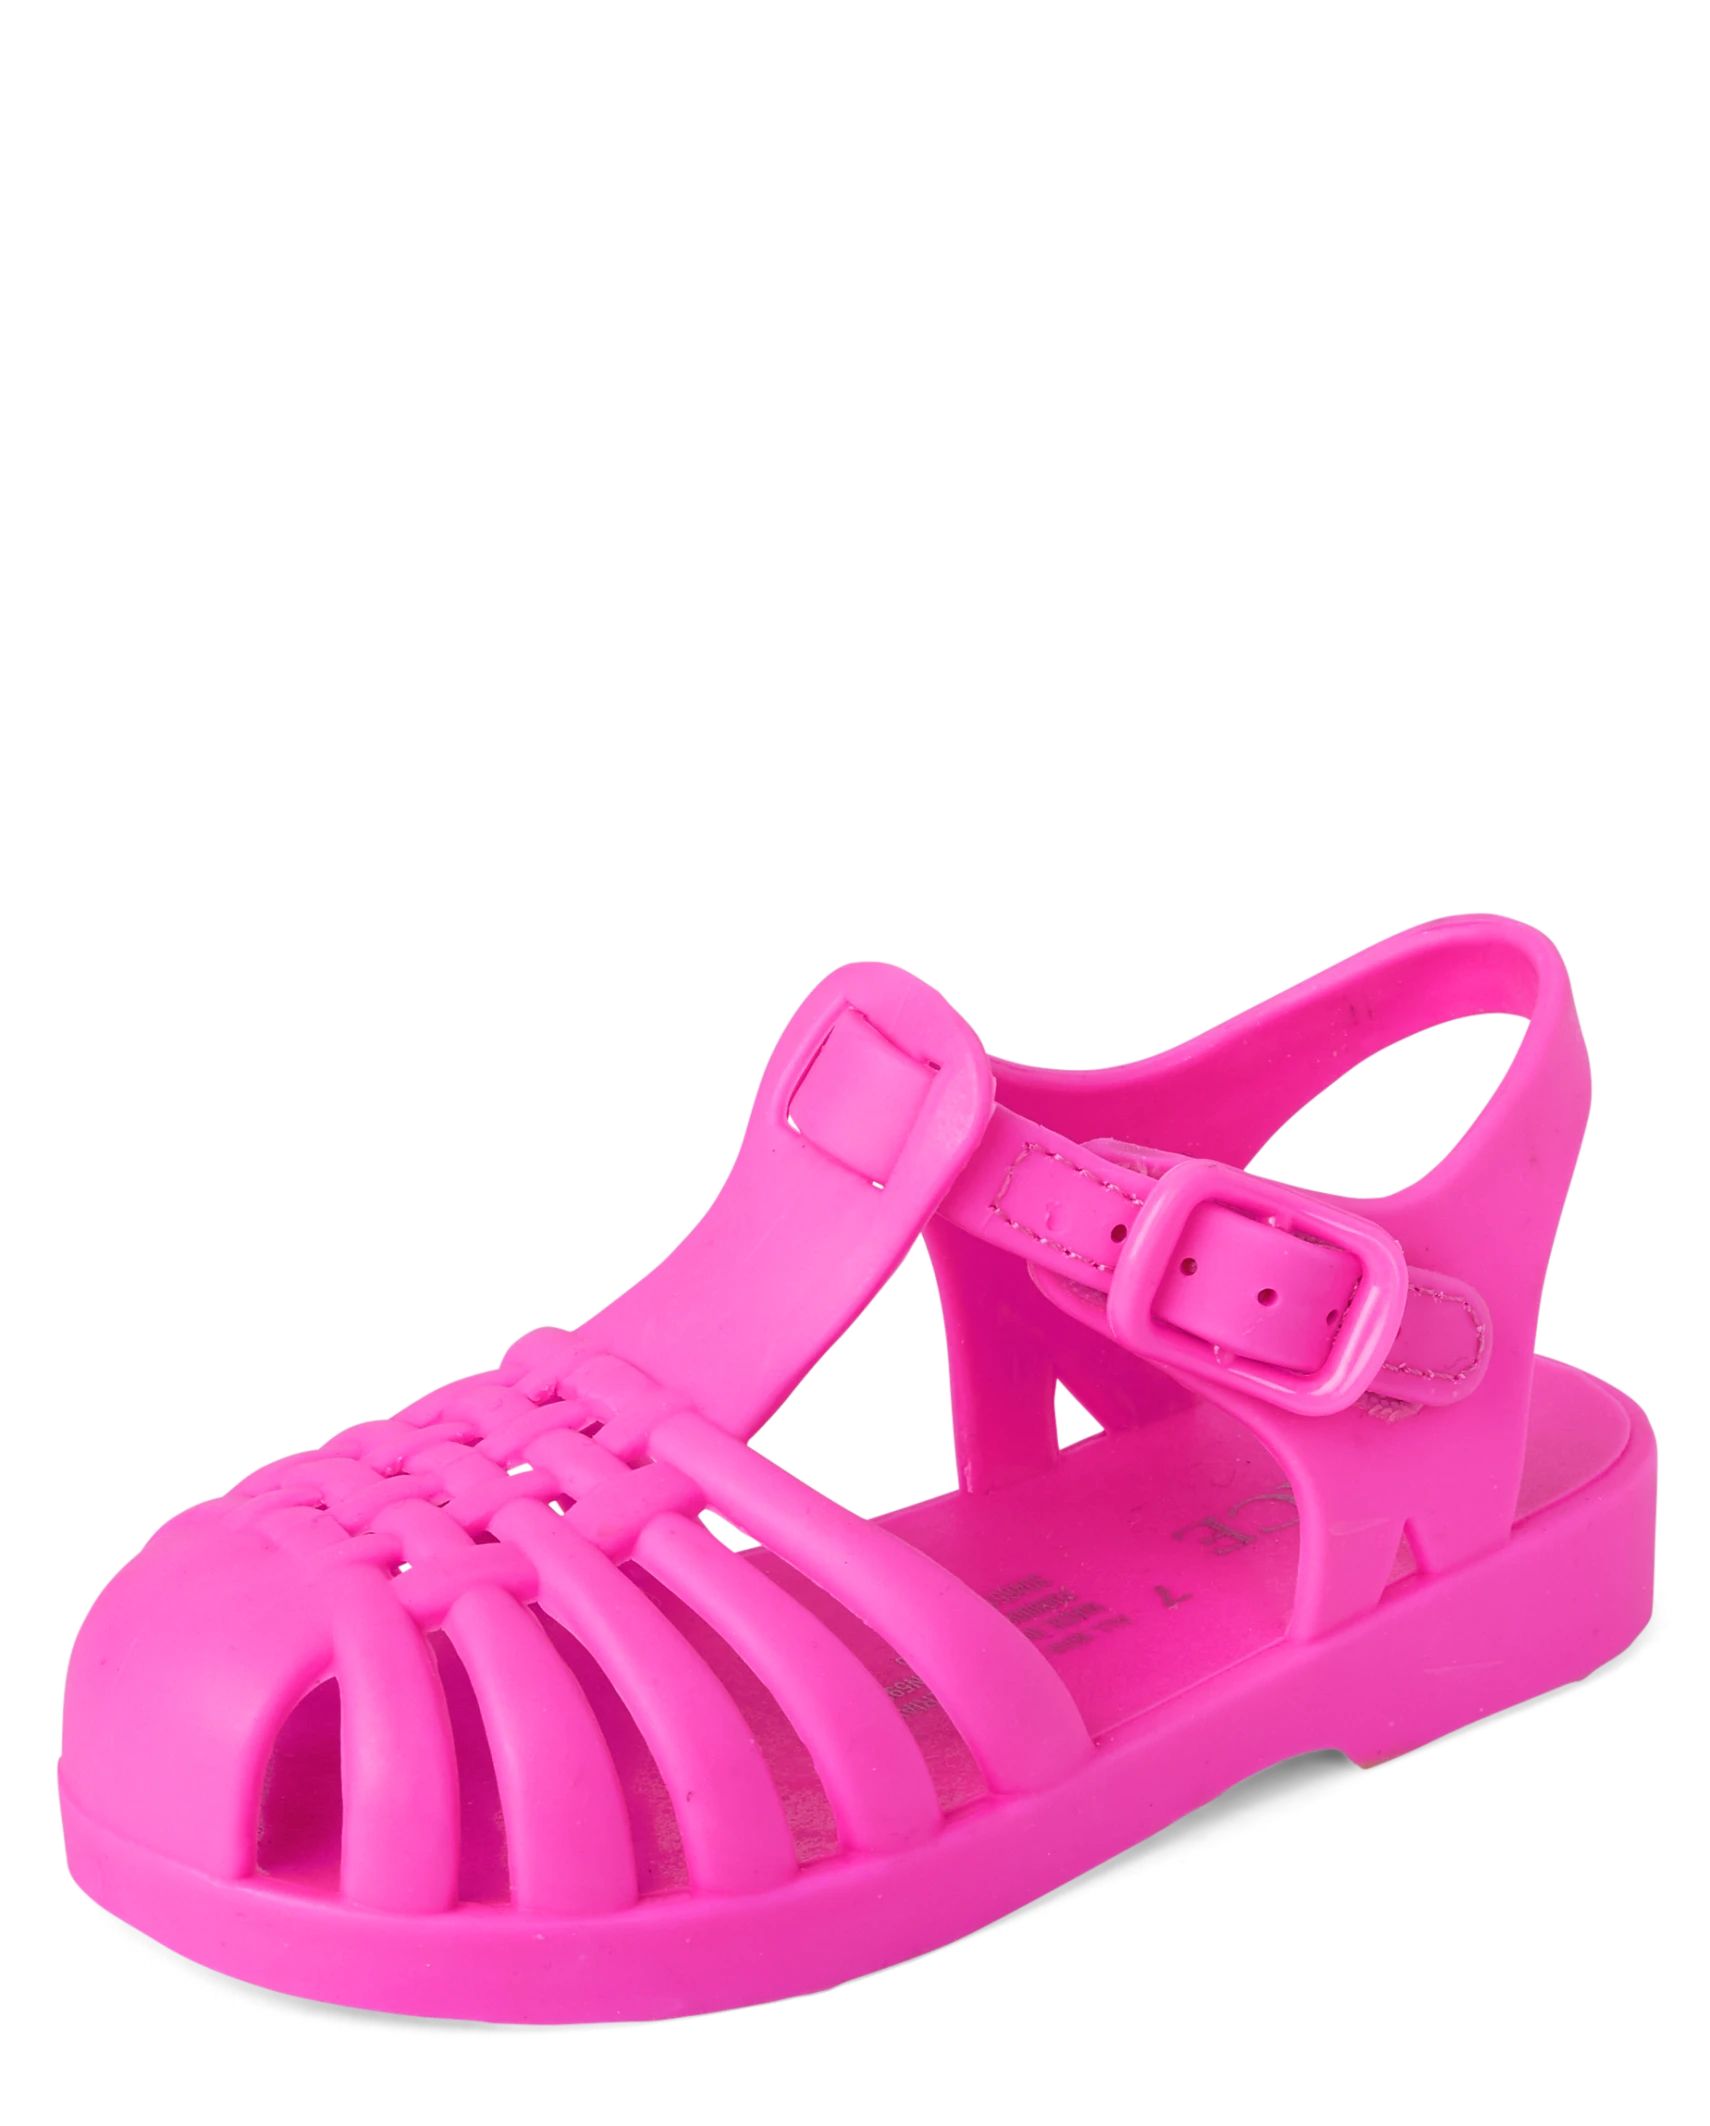 Toddler Girls Jelly Fisherman Sandals - pink | The Children's Place